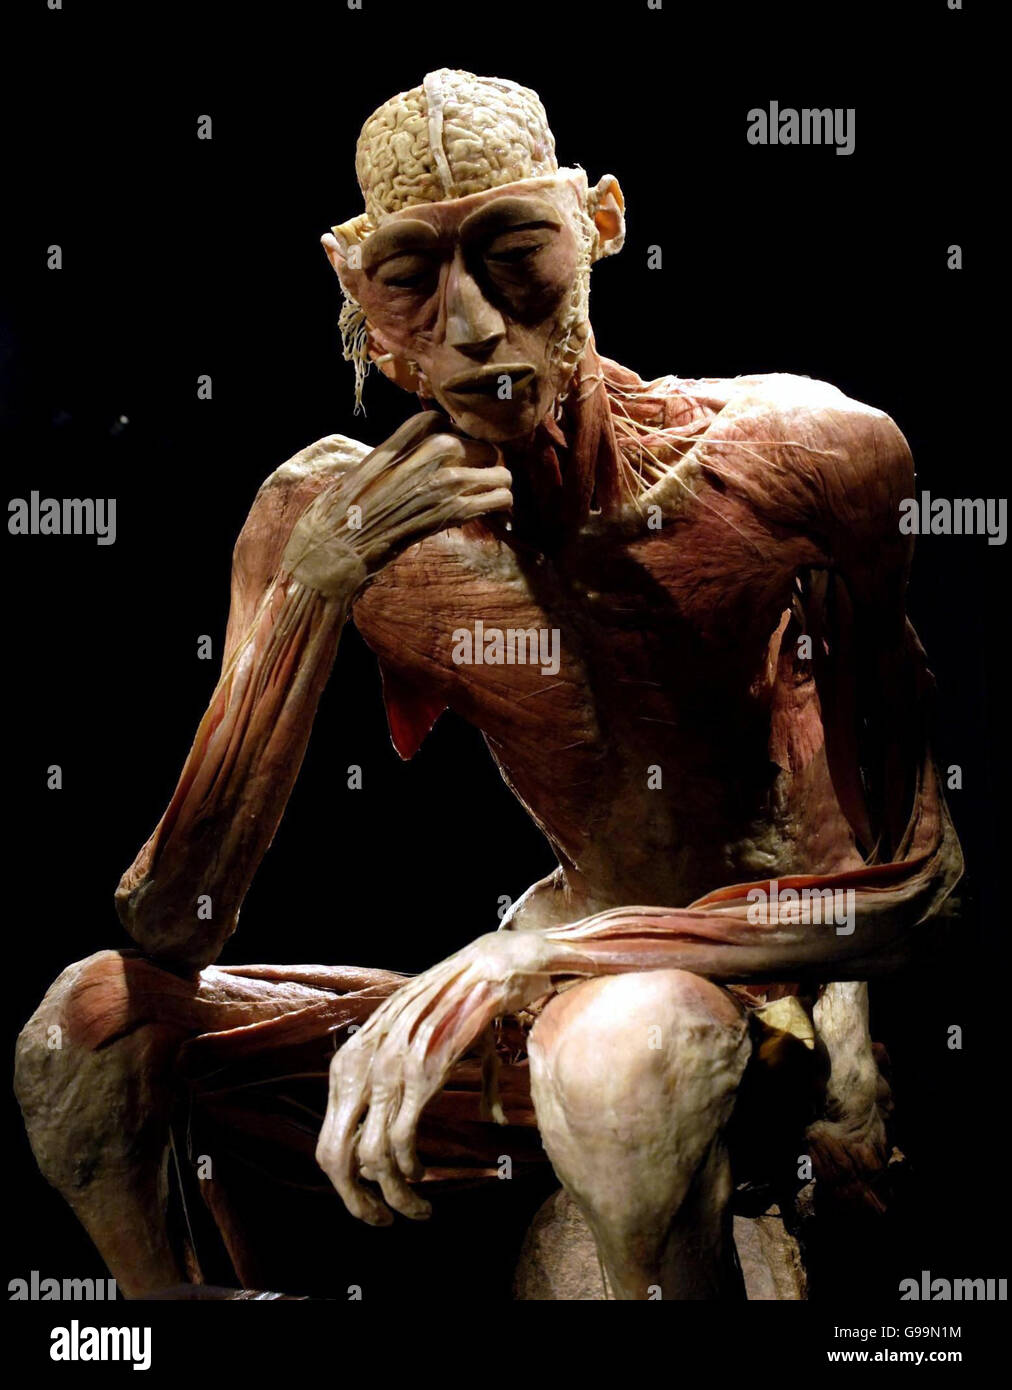 One of the human cadavers of muscle and bone of the 'Bodies' travelling exhibition which goes on display to the public today inside the Earl's Court Exhibition Centre in London. PRESS ASSOCIATION Photo. Stock Photo